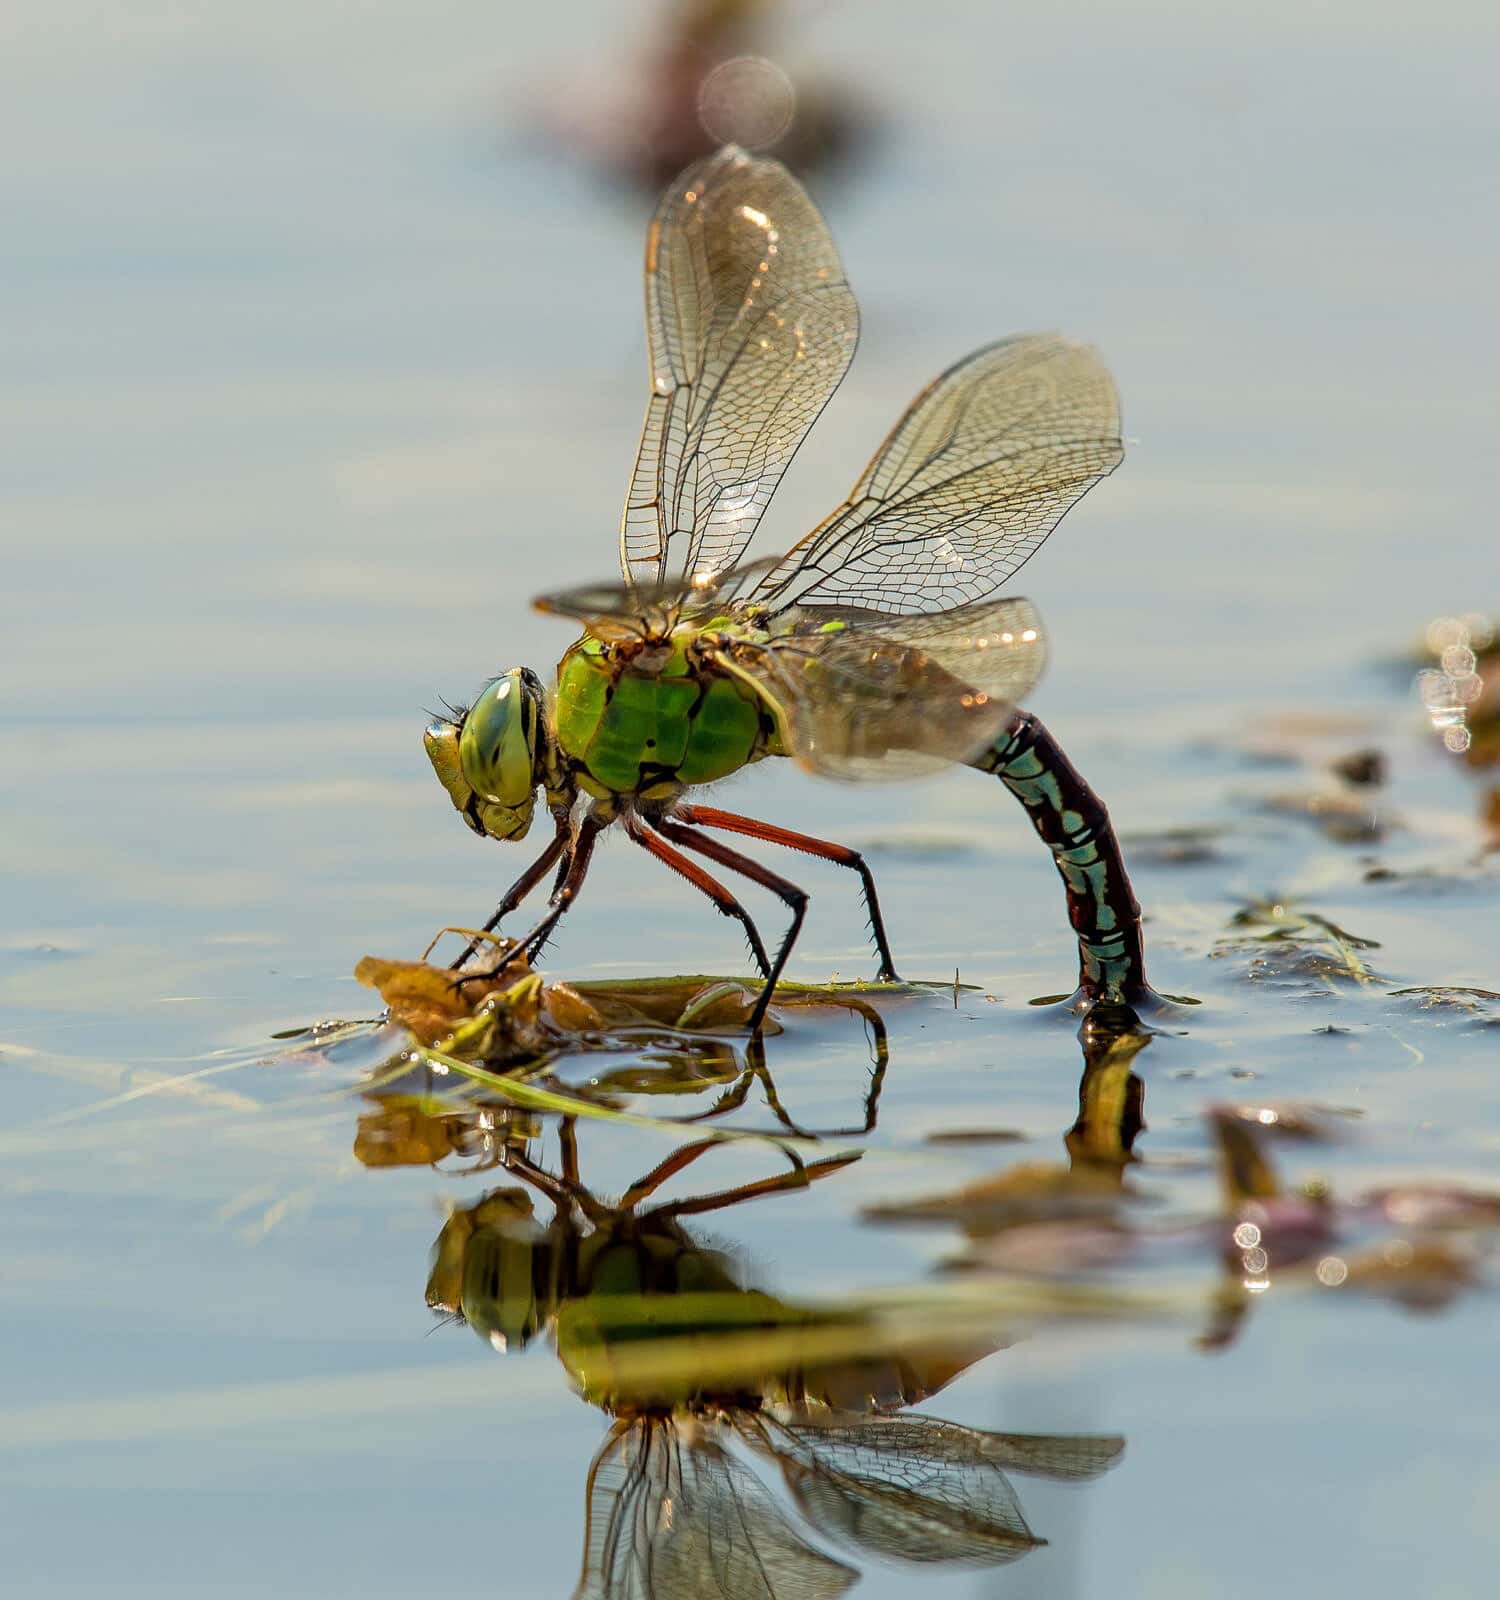 Dragonfly lays eggs under water.